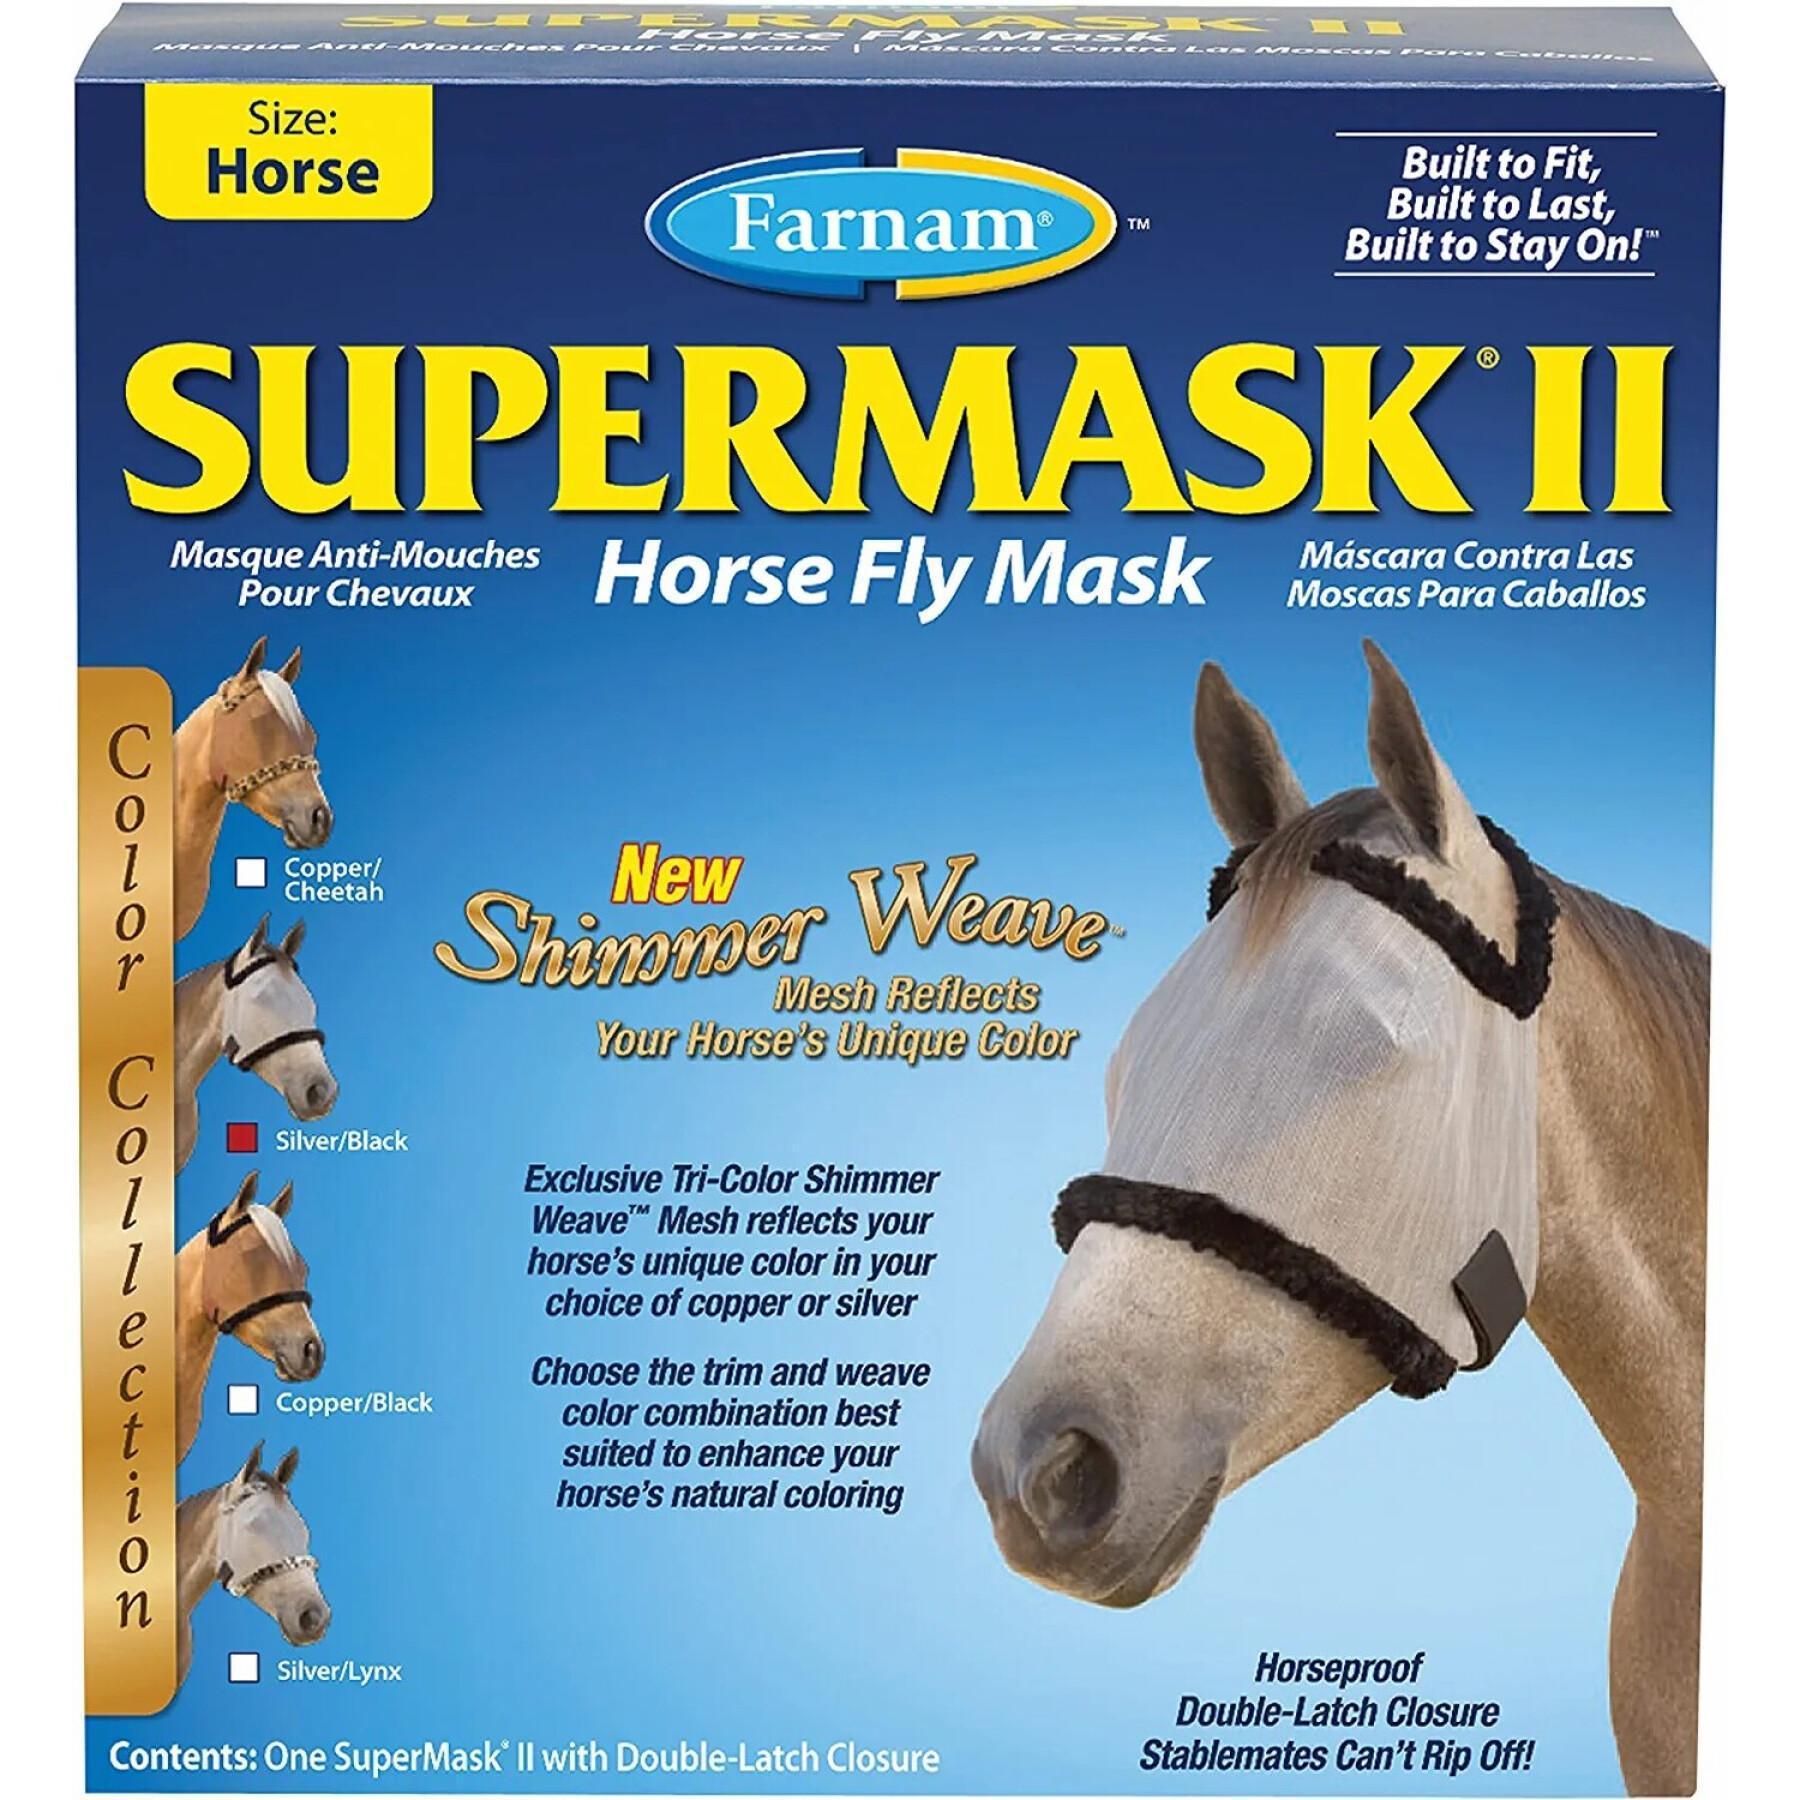 Masque anti-mouches pour cheval sans oreilles Farnam Supermask II Yearling yearling